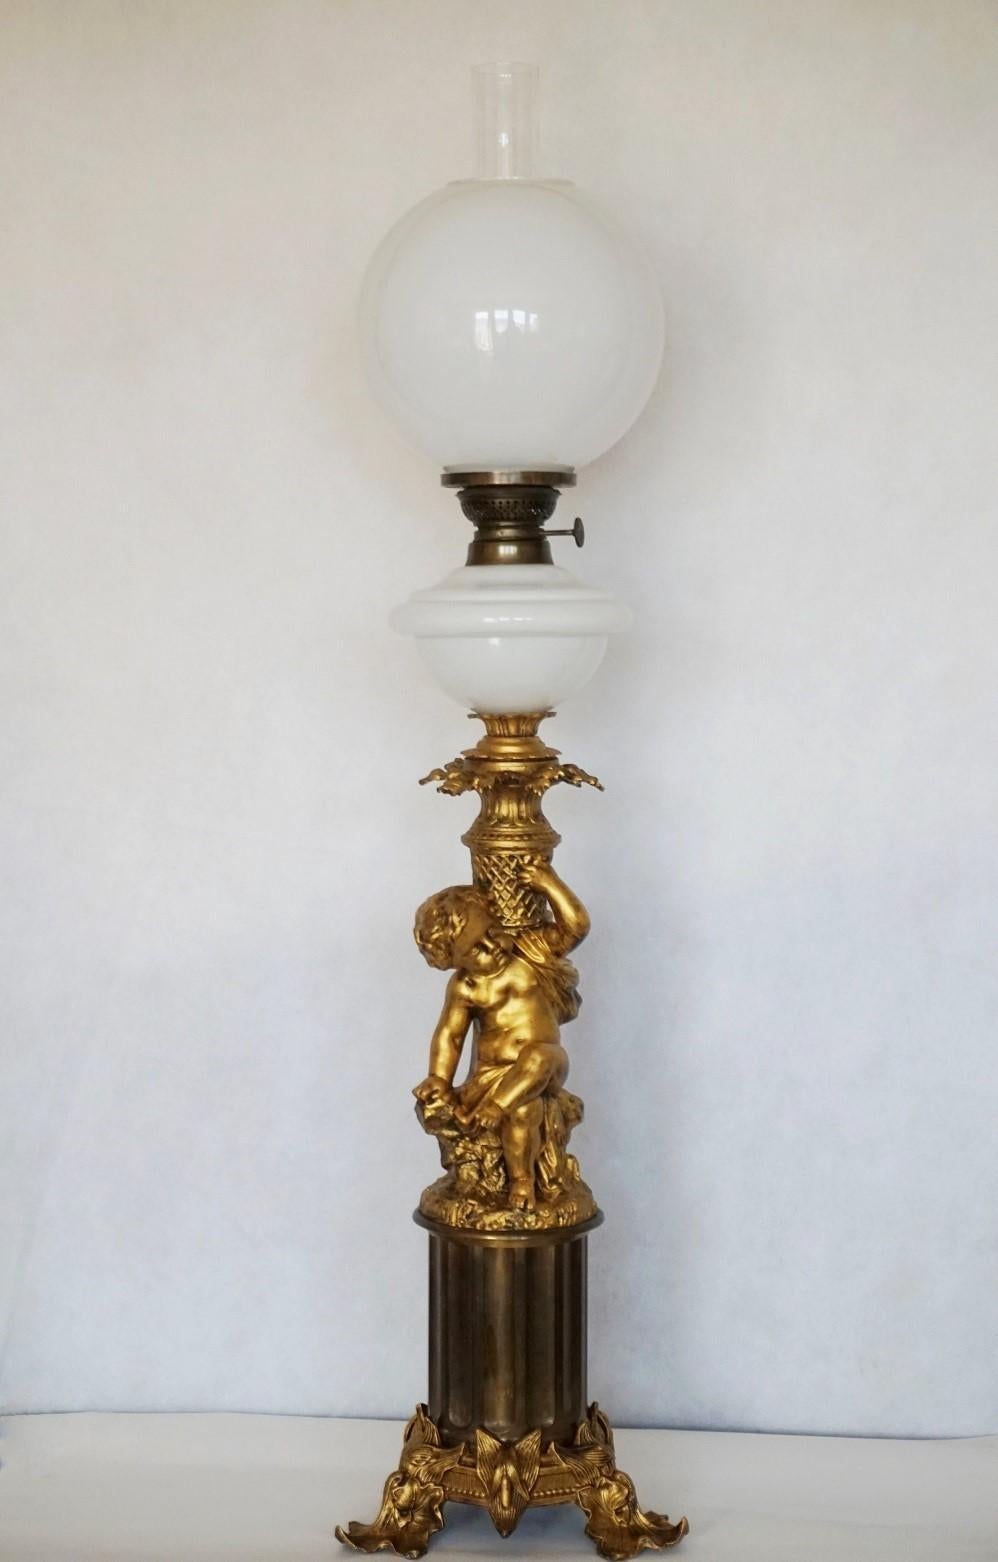 Superb large Victorian style gilt bronze library oil lamp converted to electric, France 1870-1879. Original hand blown glass oil font and shade with clear glass chimney. Beautiful cherub sitting on a rock raised on a large patinated bronze fluted